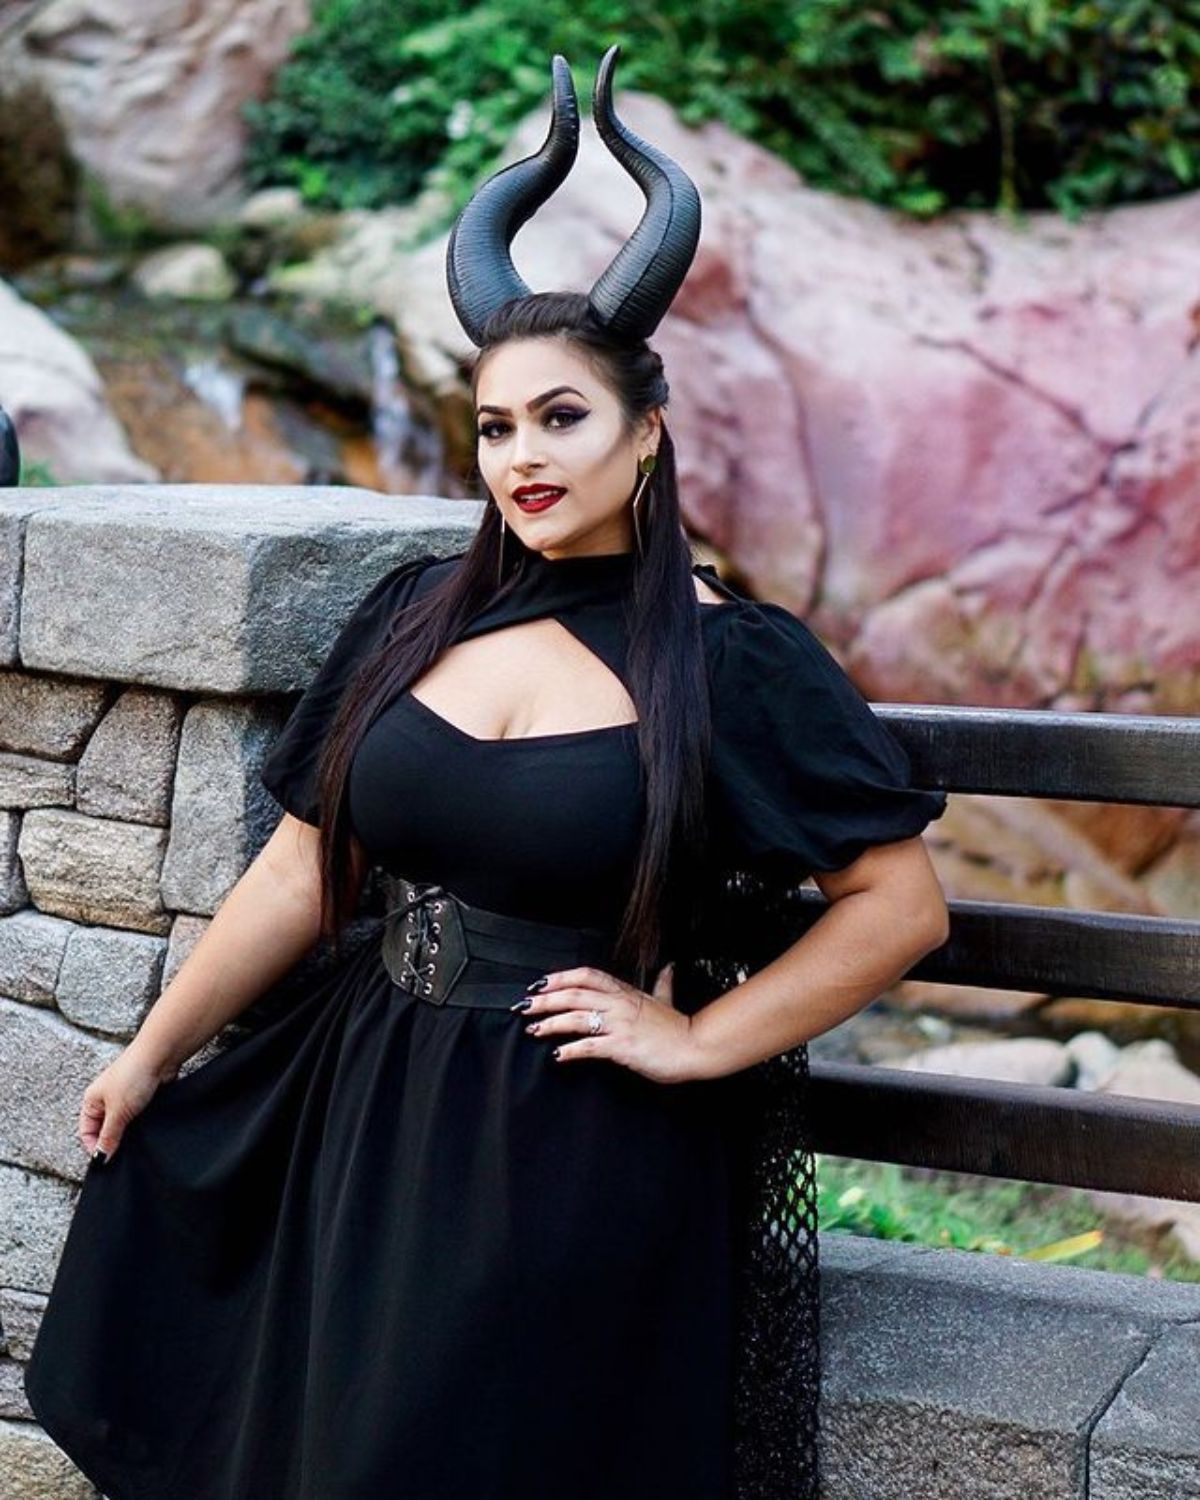 5 Maleficent Disneybound Outfit Ideas That'll Serve You Well - That Disney Fam